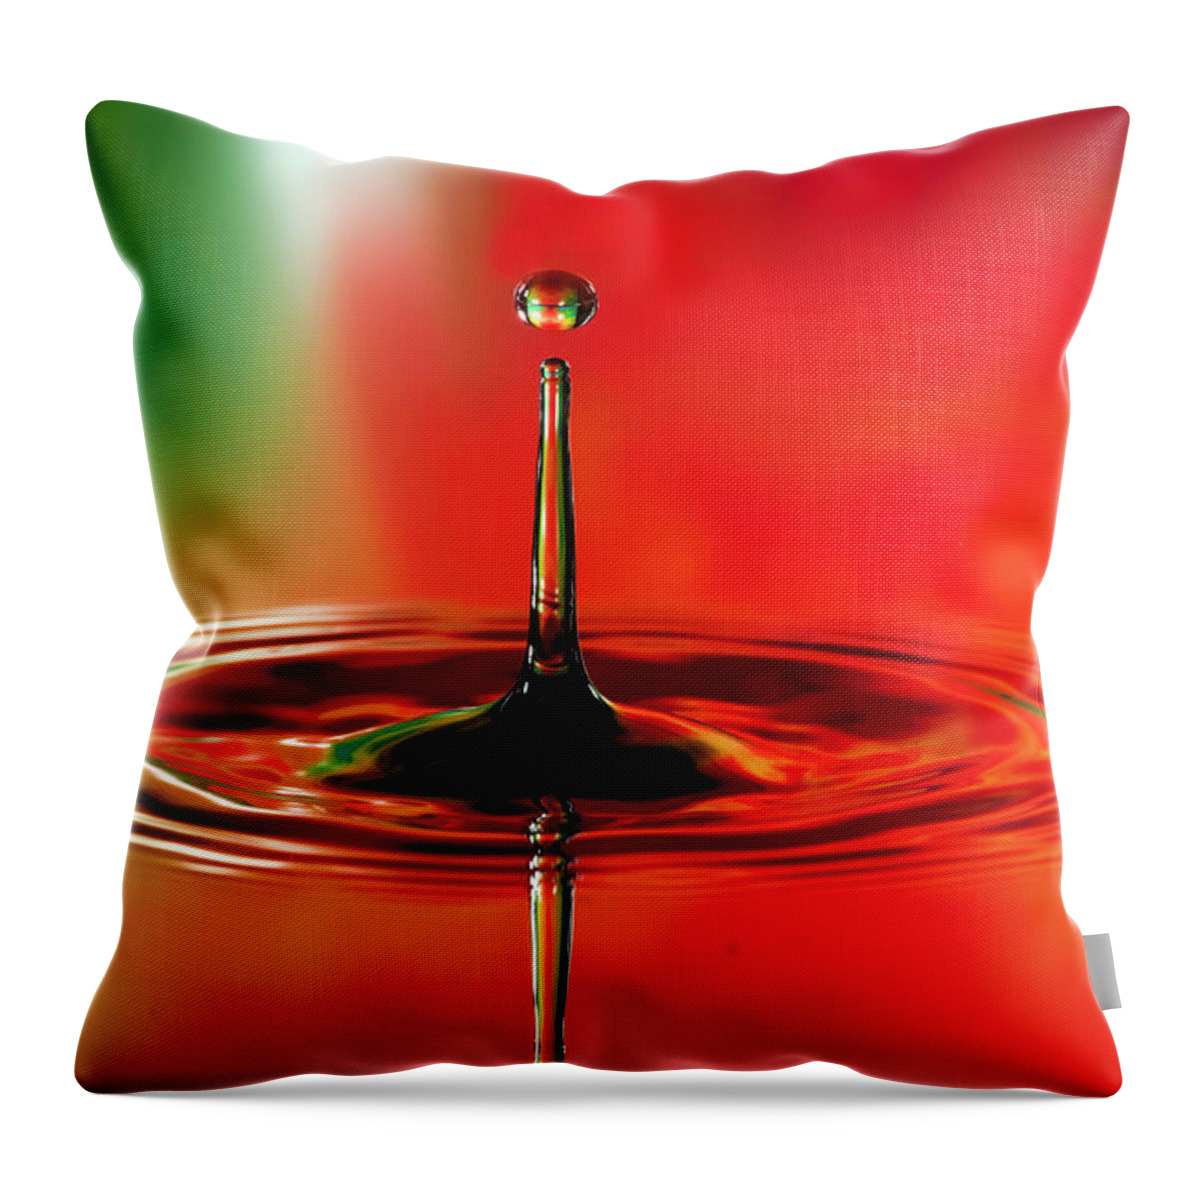 Water Tower And Drop Stop Action Throw Pillow featuring the photograph Water Tower and Drop Stop Action by Phyllis Taylor